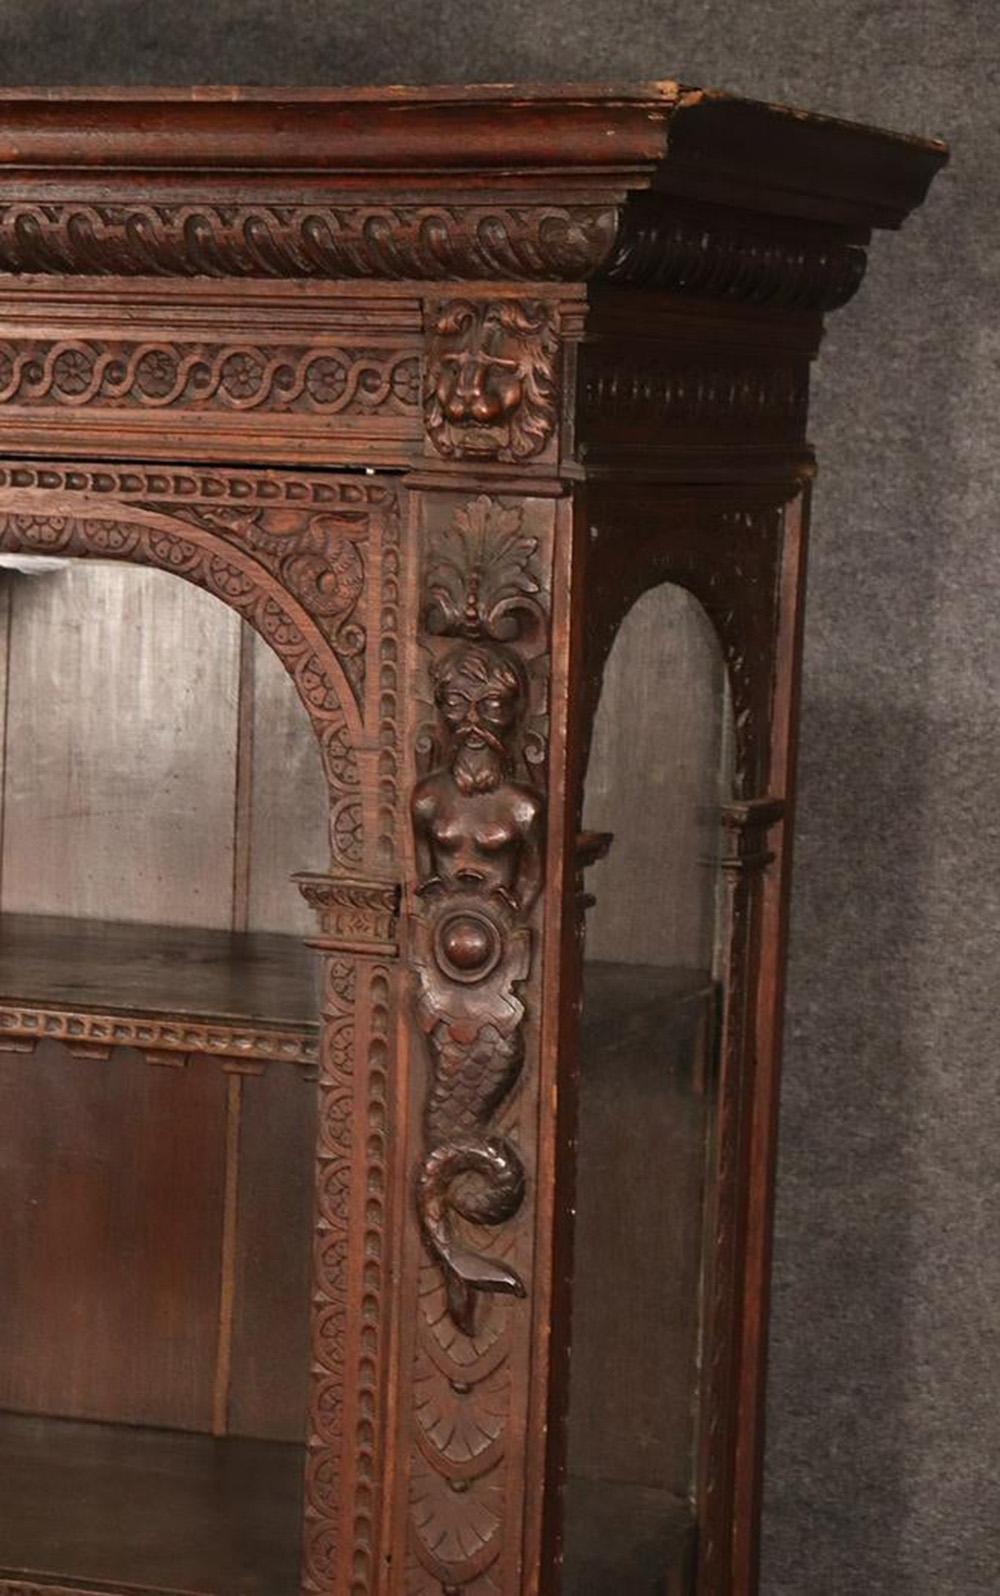 Rare late 1700s era Italian carved oak figural china cabinet vitrine bookcase with one door and 2 shelves.
Measures: 66 1/8